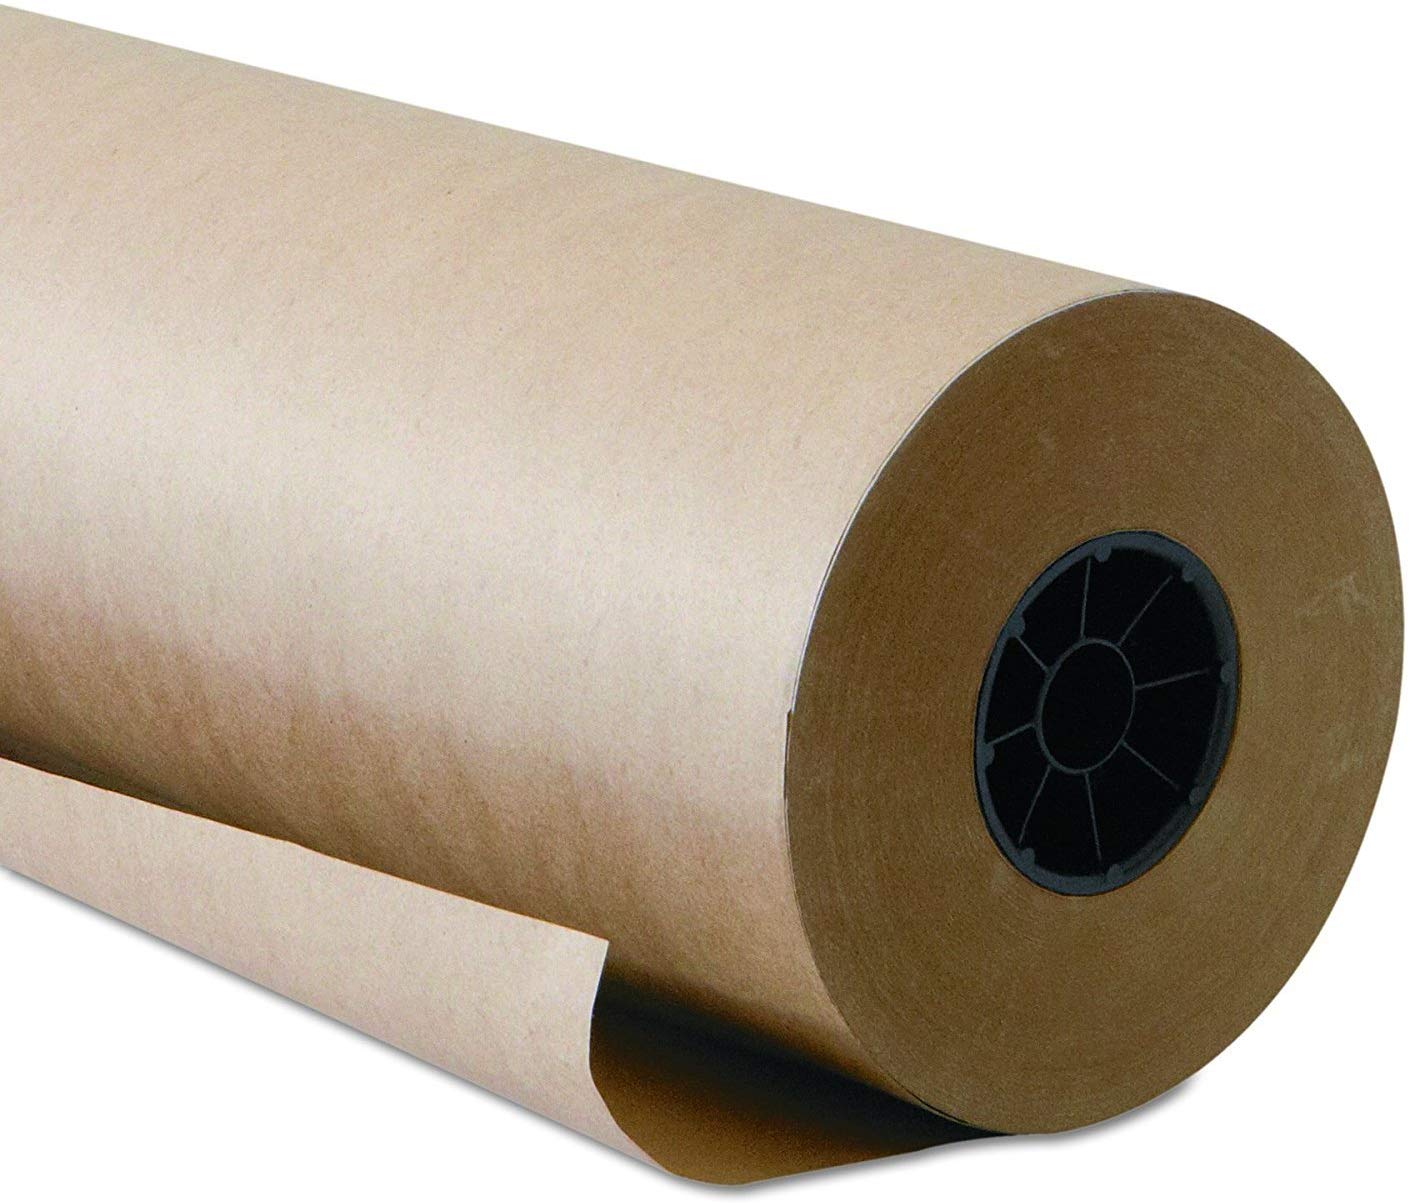 Kraft Paper Roll 48 X 1800 Inch - Brown Craft Paper Table Cover